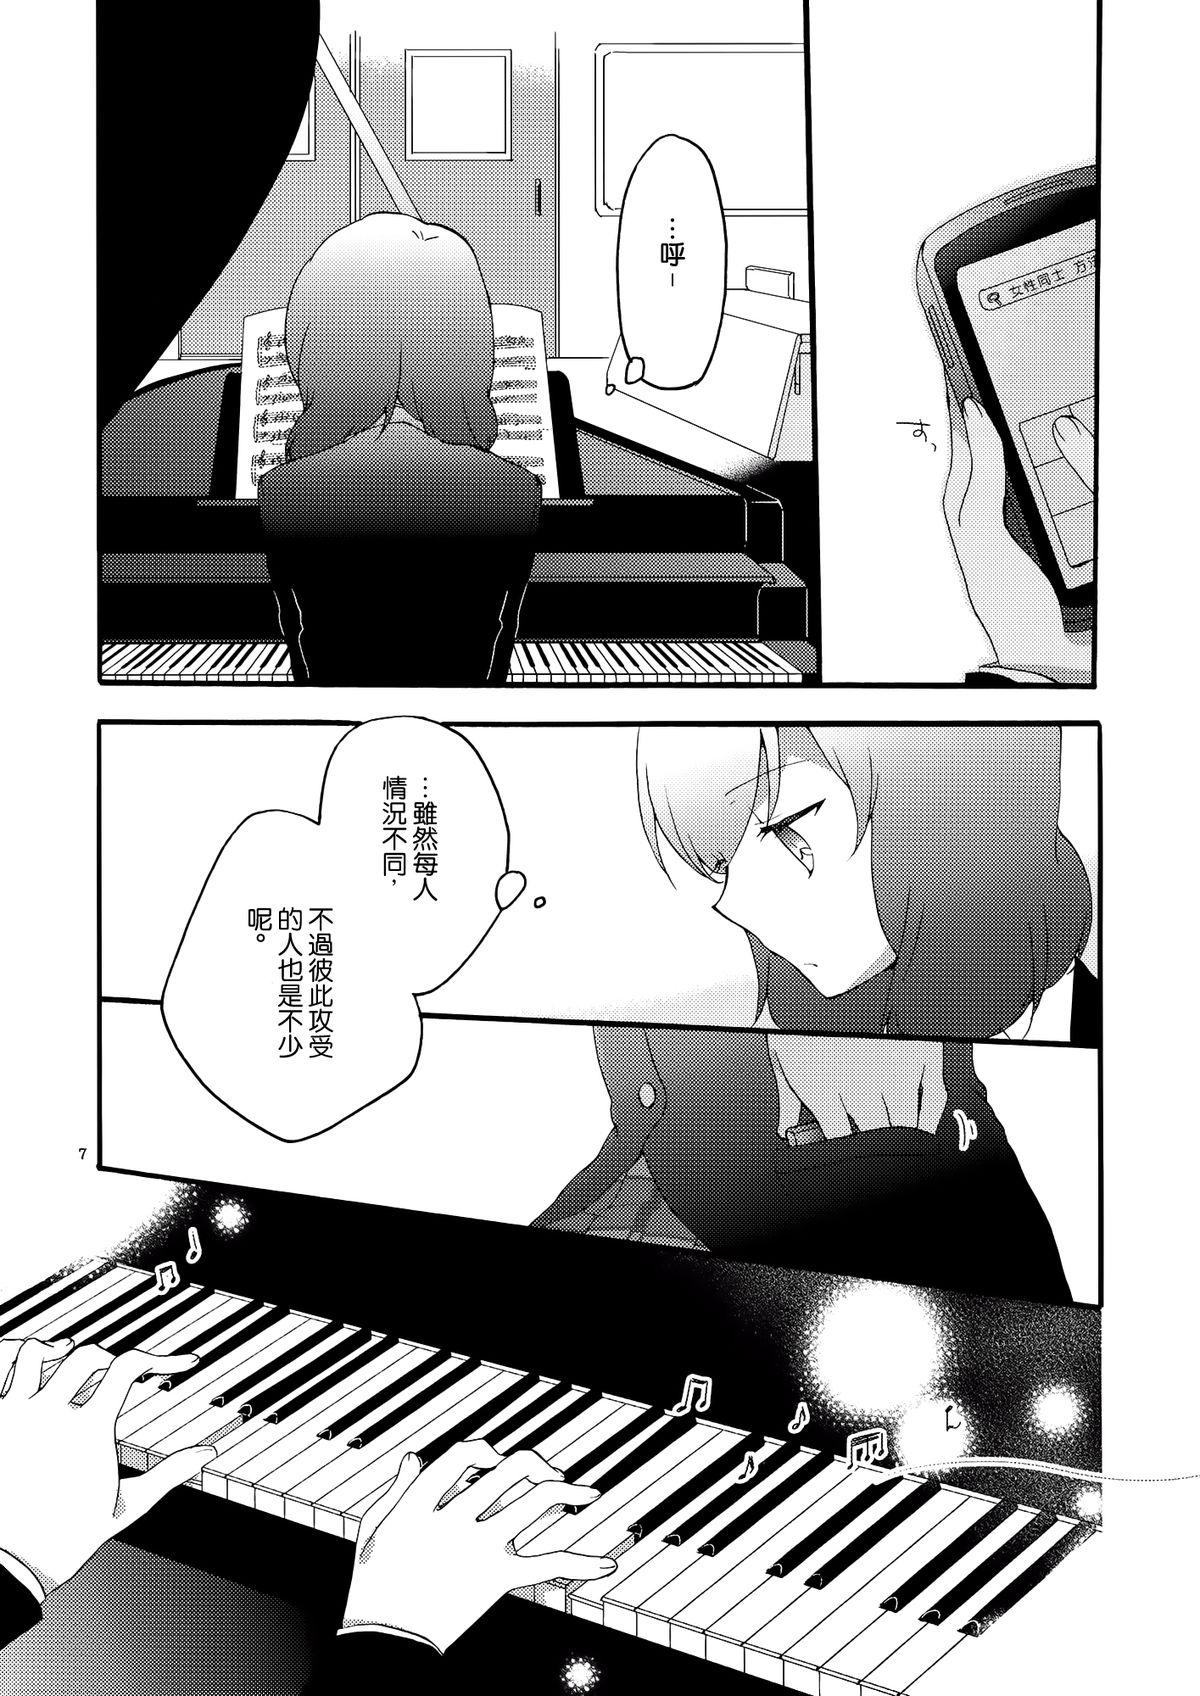 Polla Lovesick Girl - Love live Interacial - Page 6